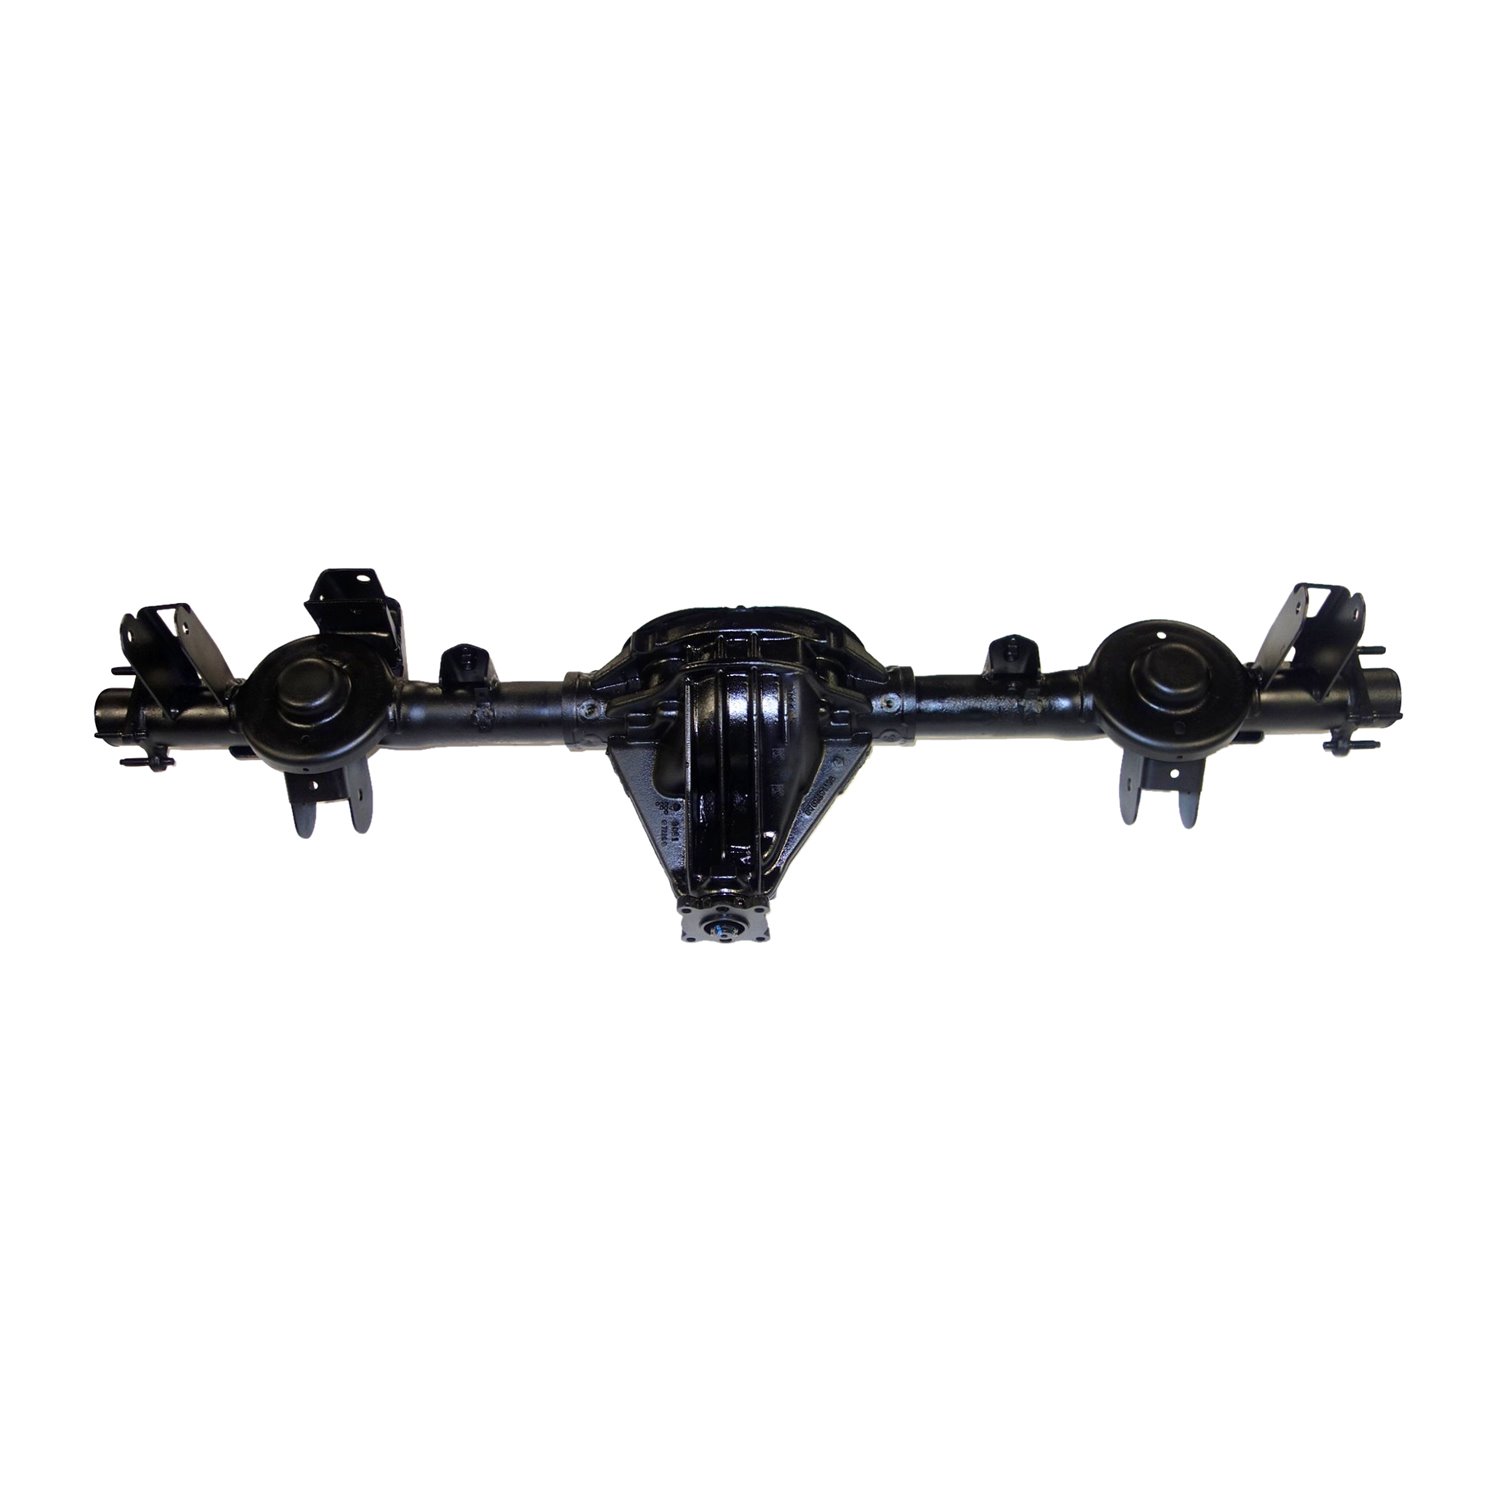 Remanufactured Complete Axle Assembly for Chy 8.25" 2005 Liberty 3.73 , 2.8l with ABS